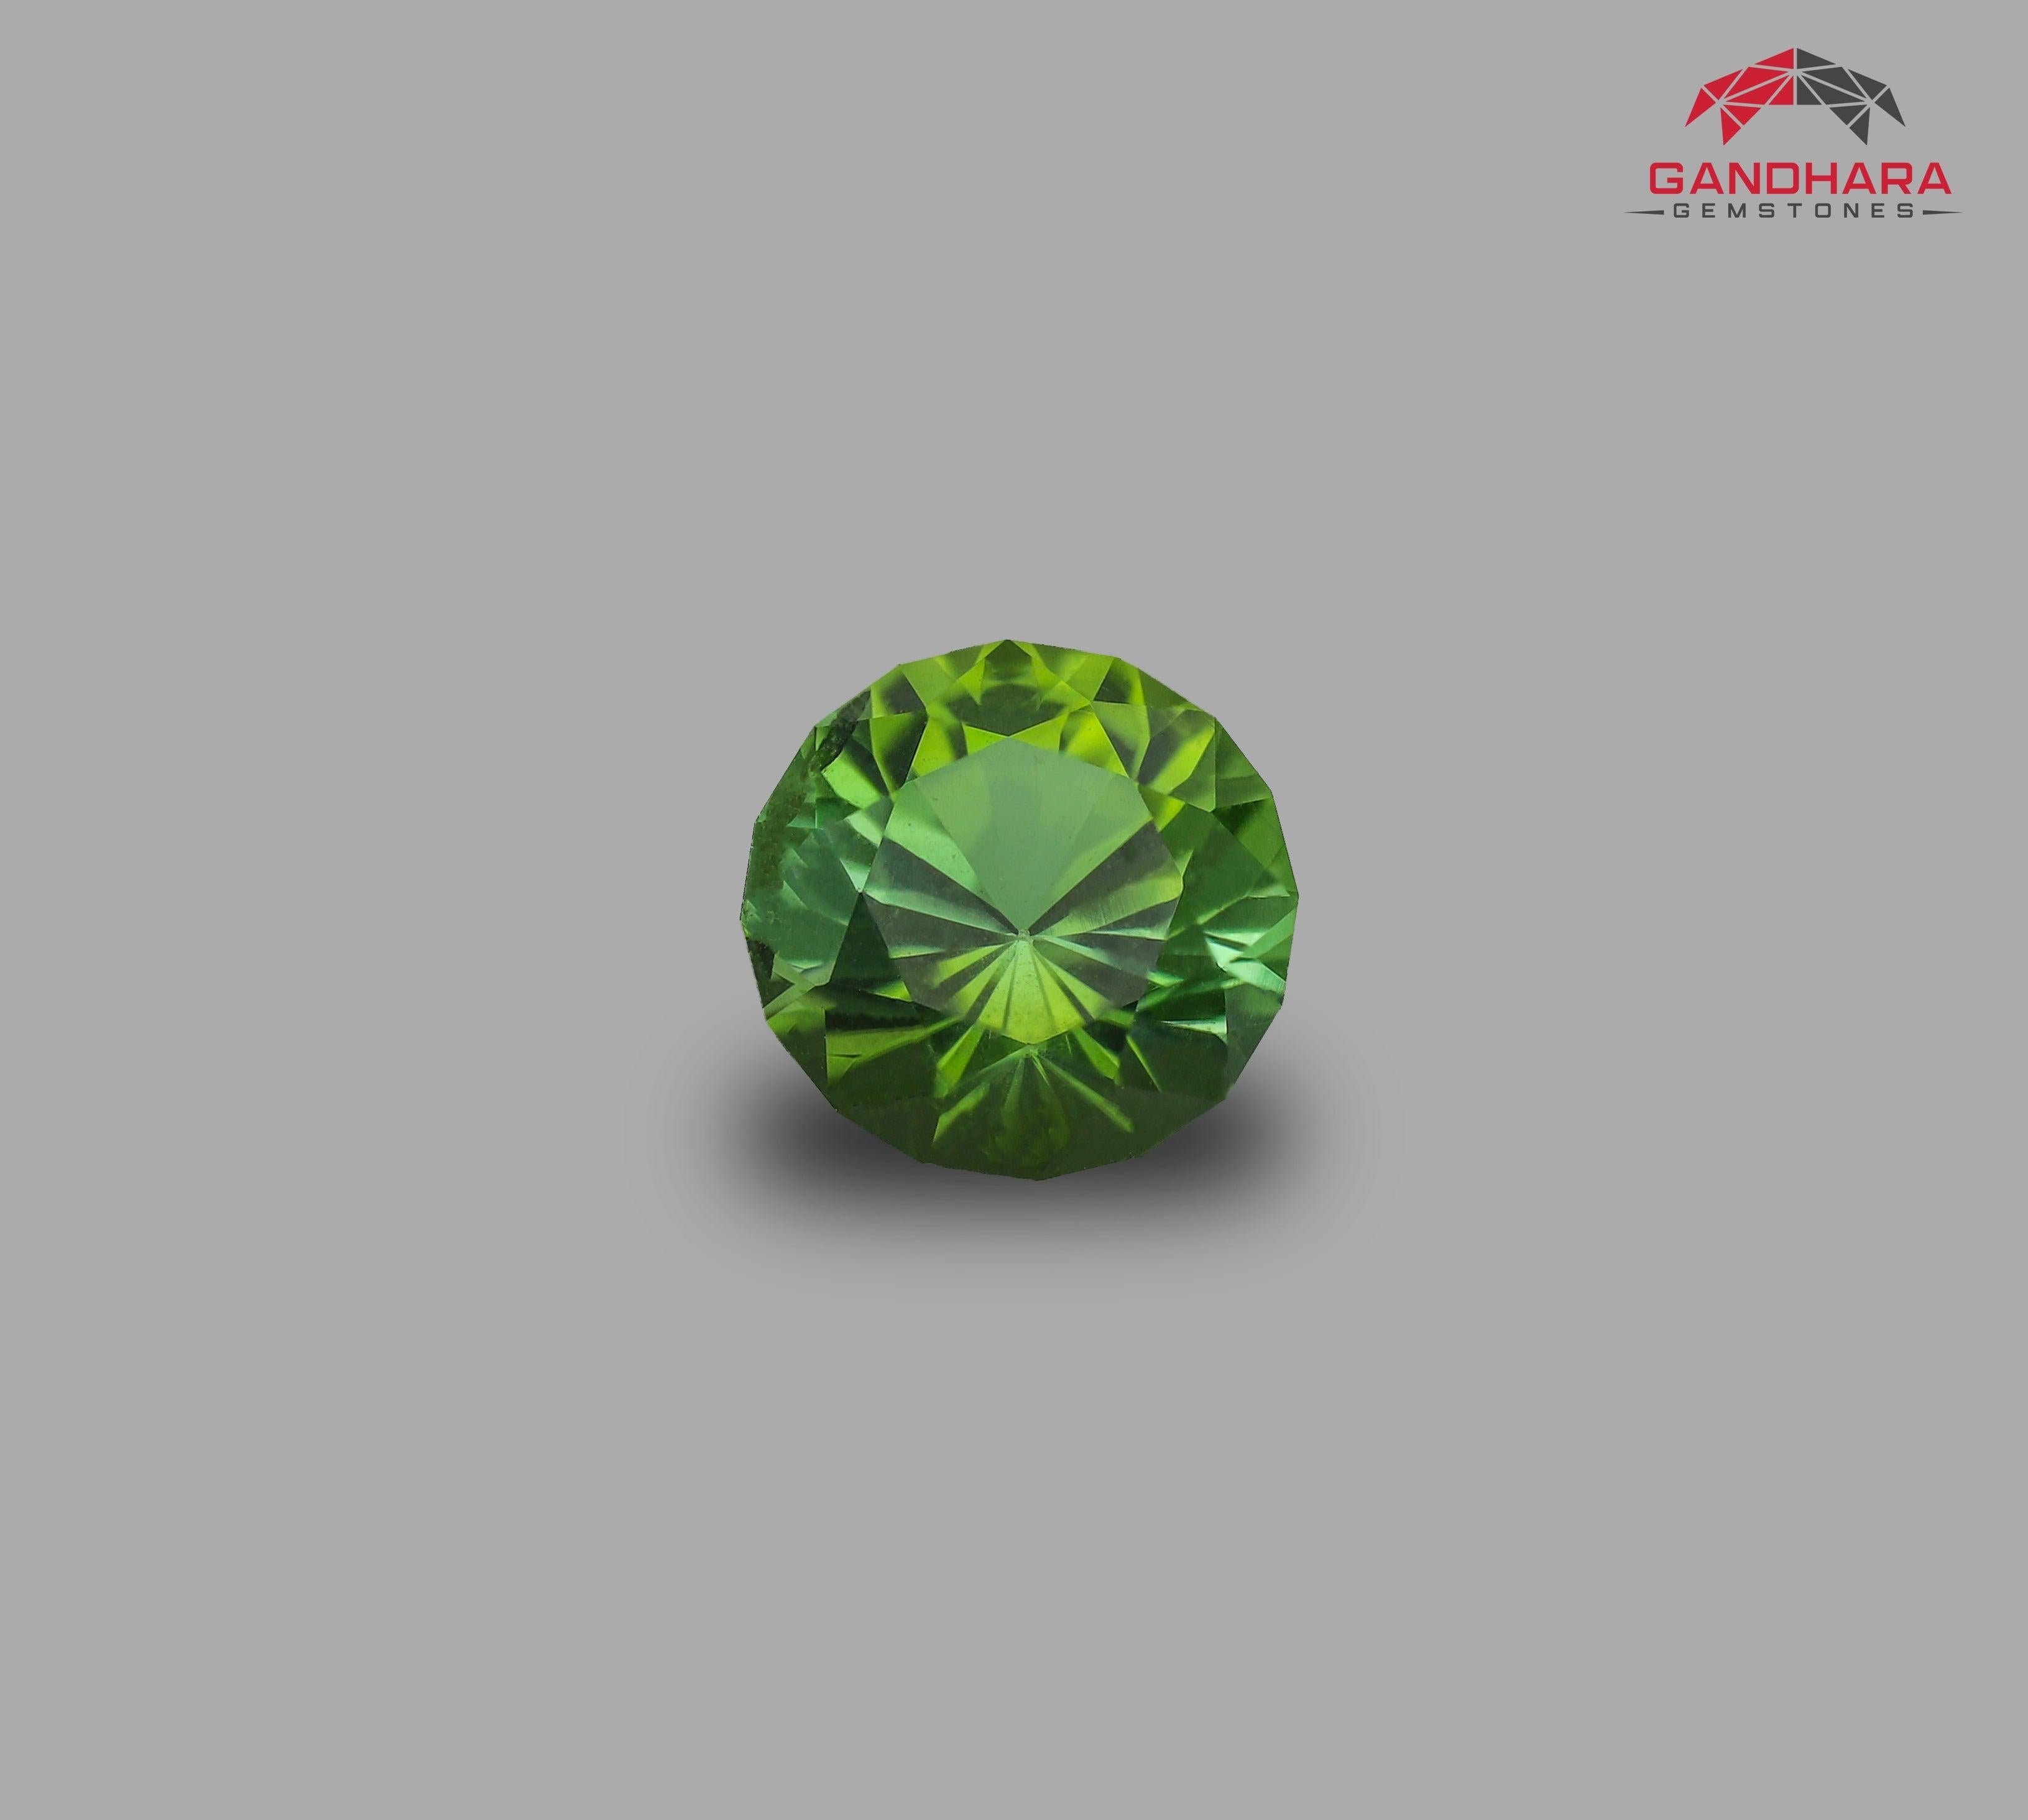 Apple Green Tourmaline Gemstone, available for sale at wholesale price, natural high-quality, 0.840 carats Loose certified tourmaline gemstone from Afghanistan.

Product Information:
GEMSTONE TYPE	Apple Green Tourmaline Gemstone
WEIGHT	0.840